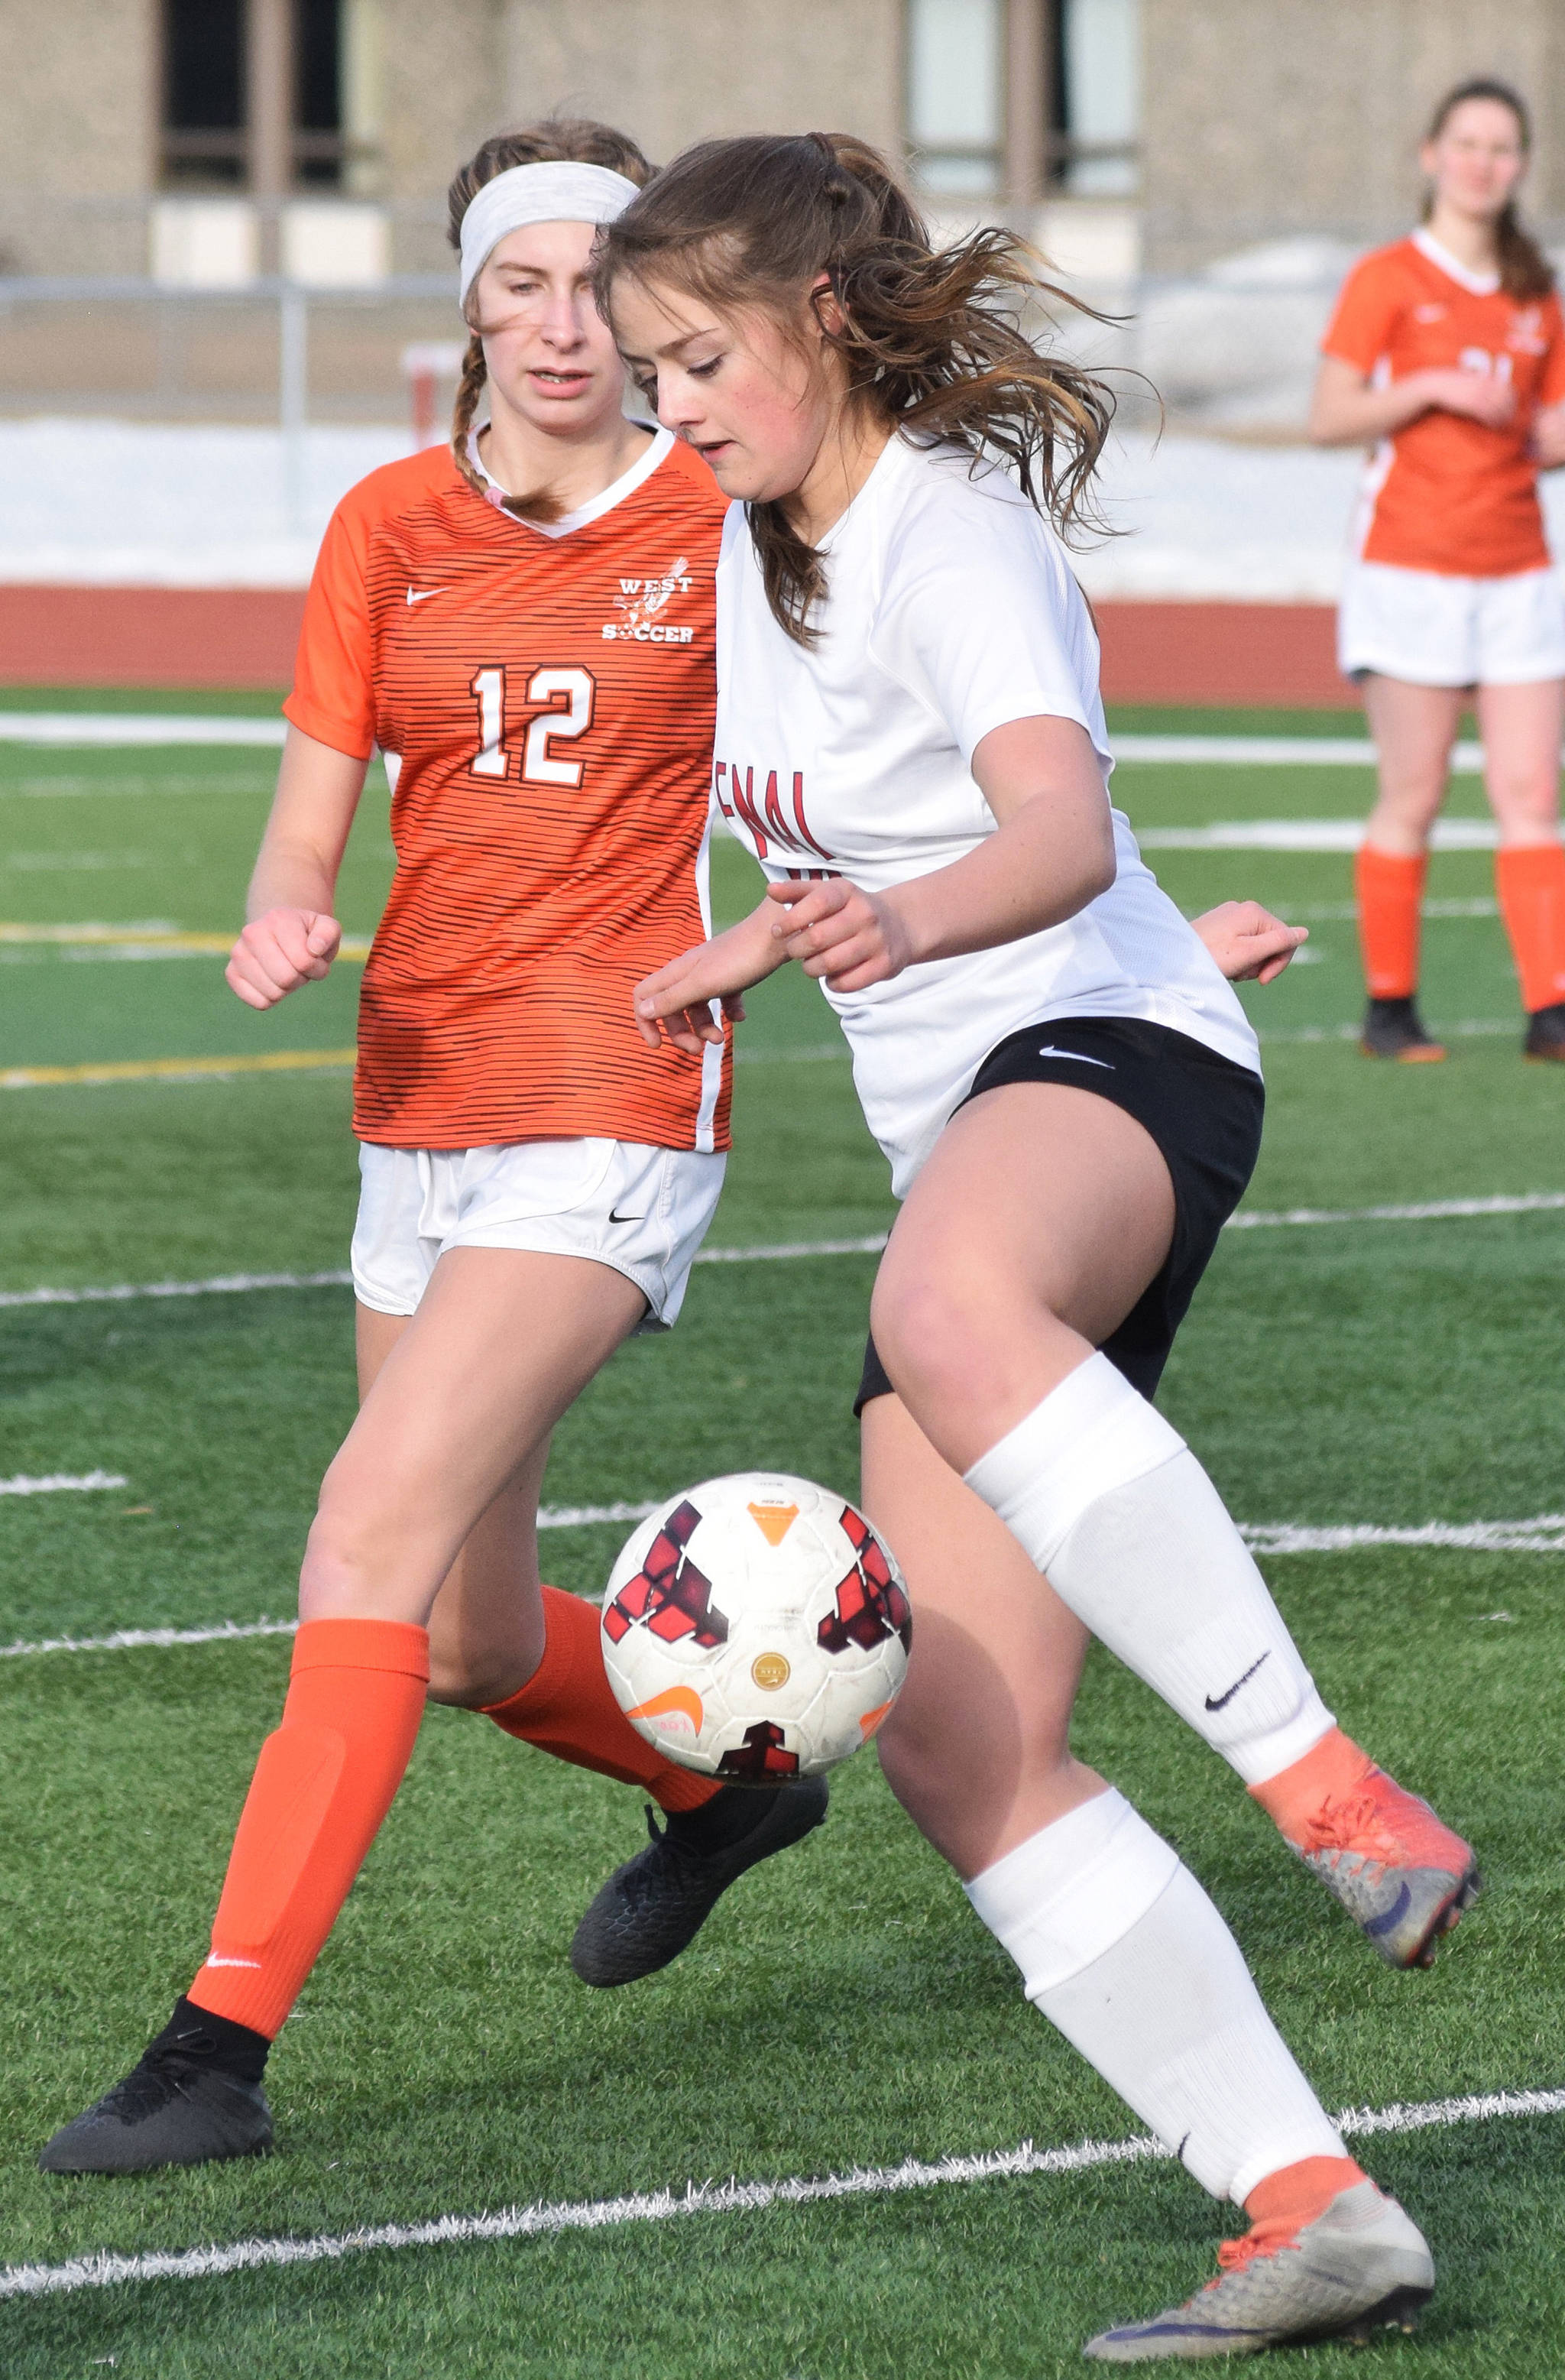 Kenai’s Rileigh Pace (right) manuevers the ball around West defender Jamey Roy (12) Thursday, April 4, 2019, in a nonconference game at Kenai Central High School. (Photo by Joey Klecka/Peninsula Clarion)